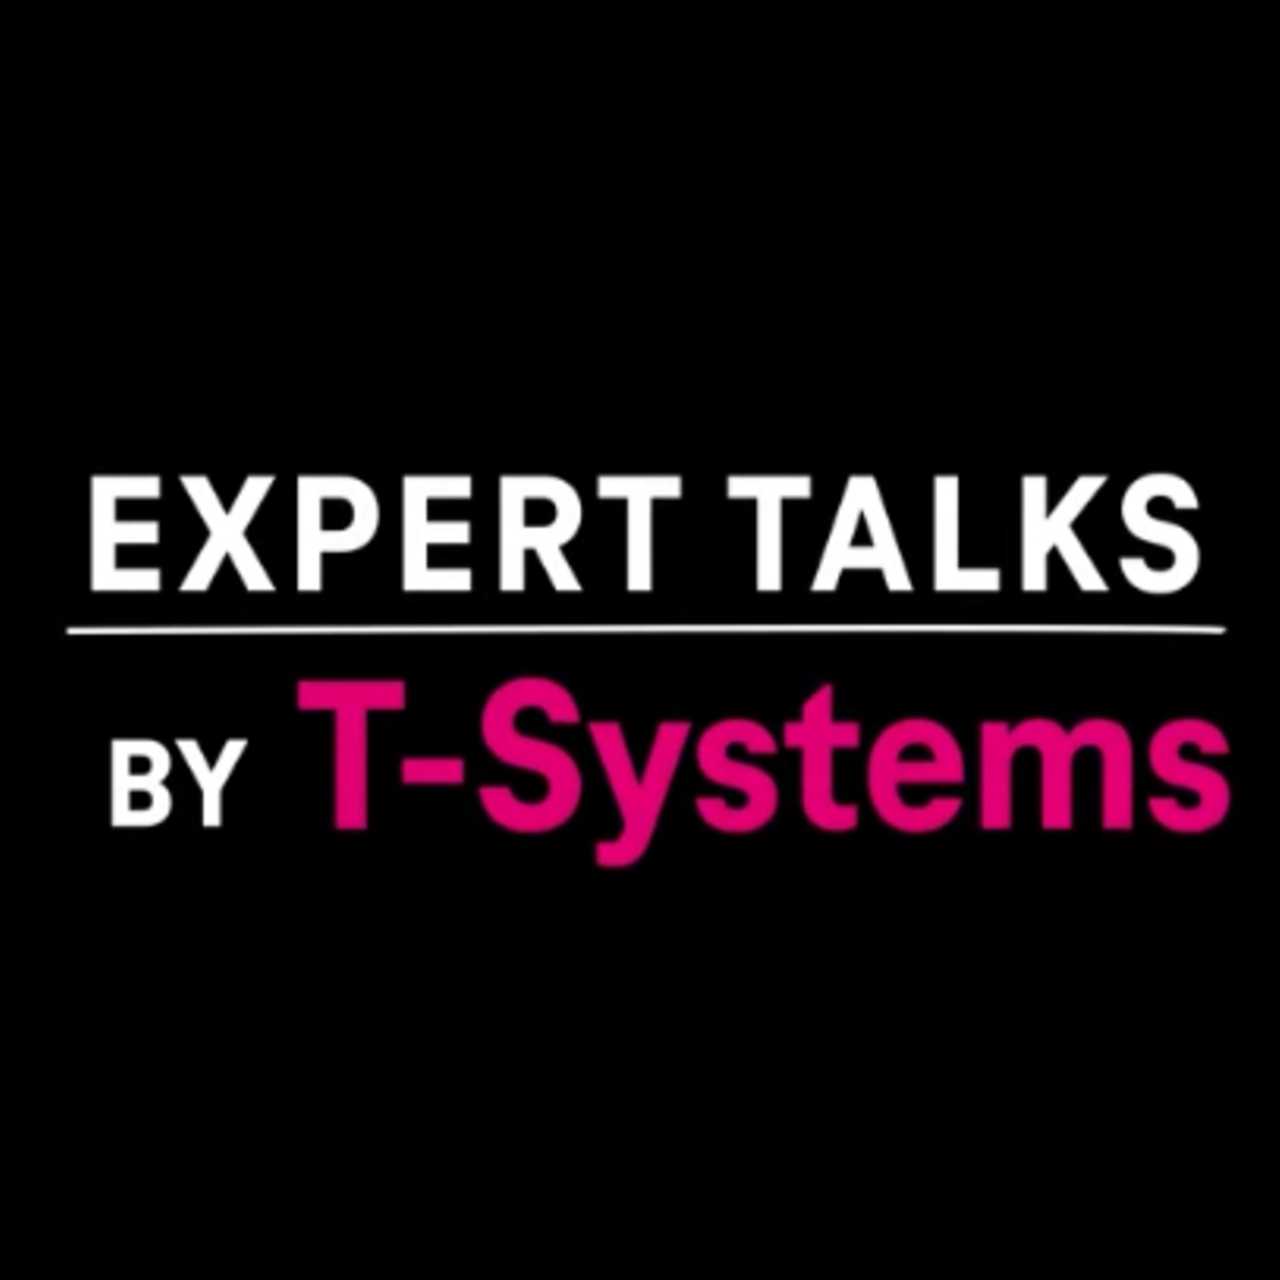 Expert Talks by T-Systems